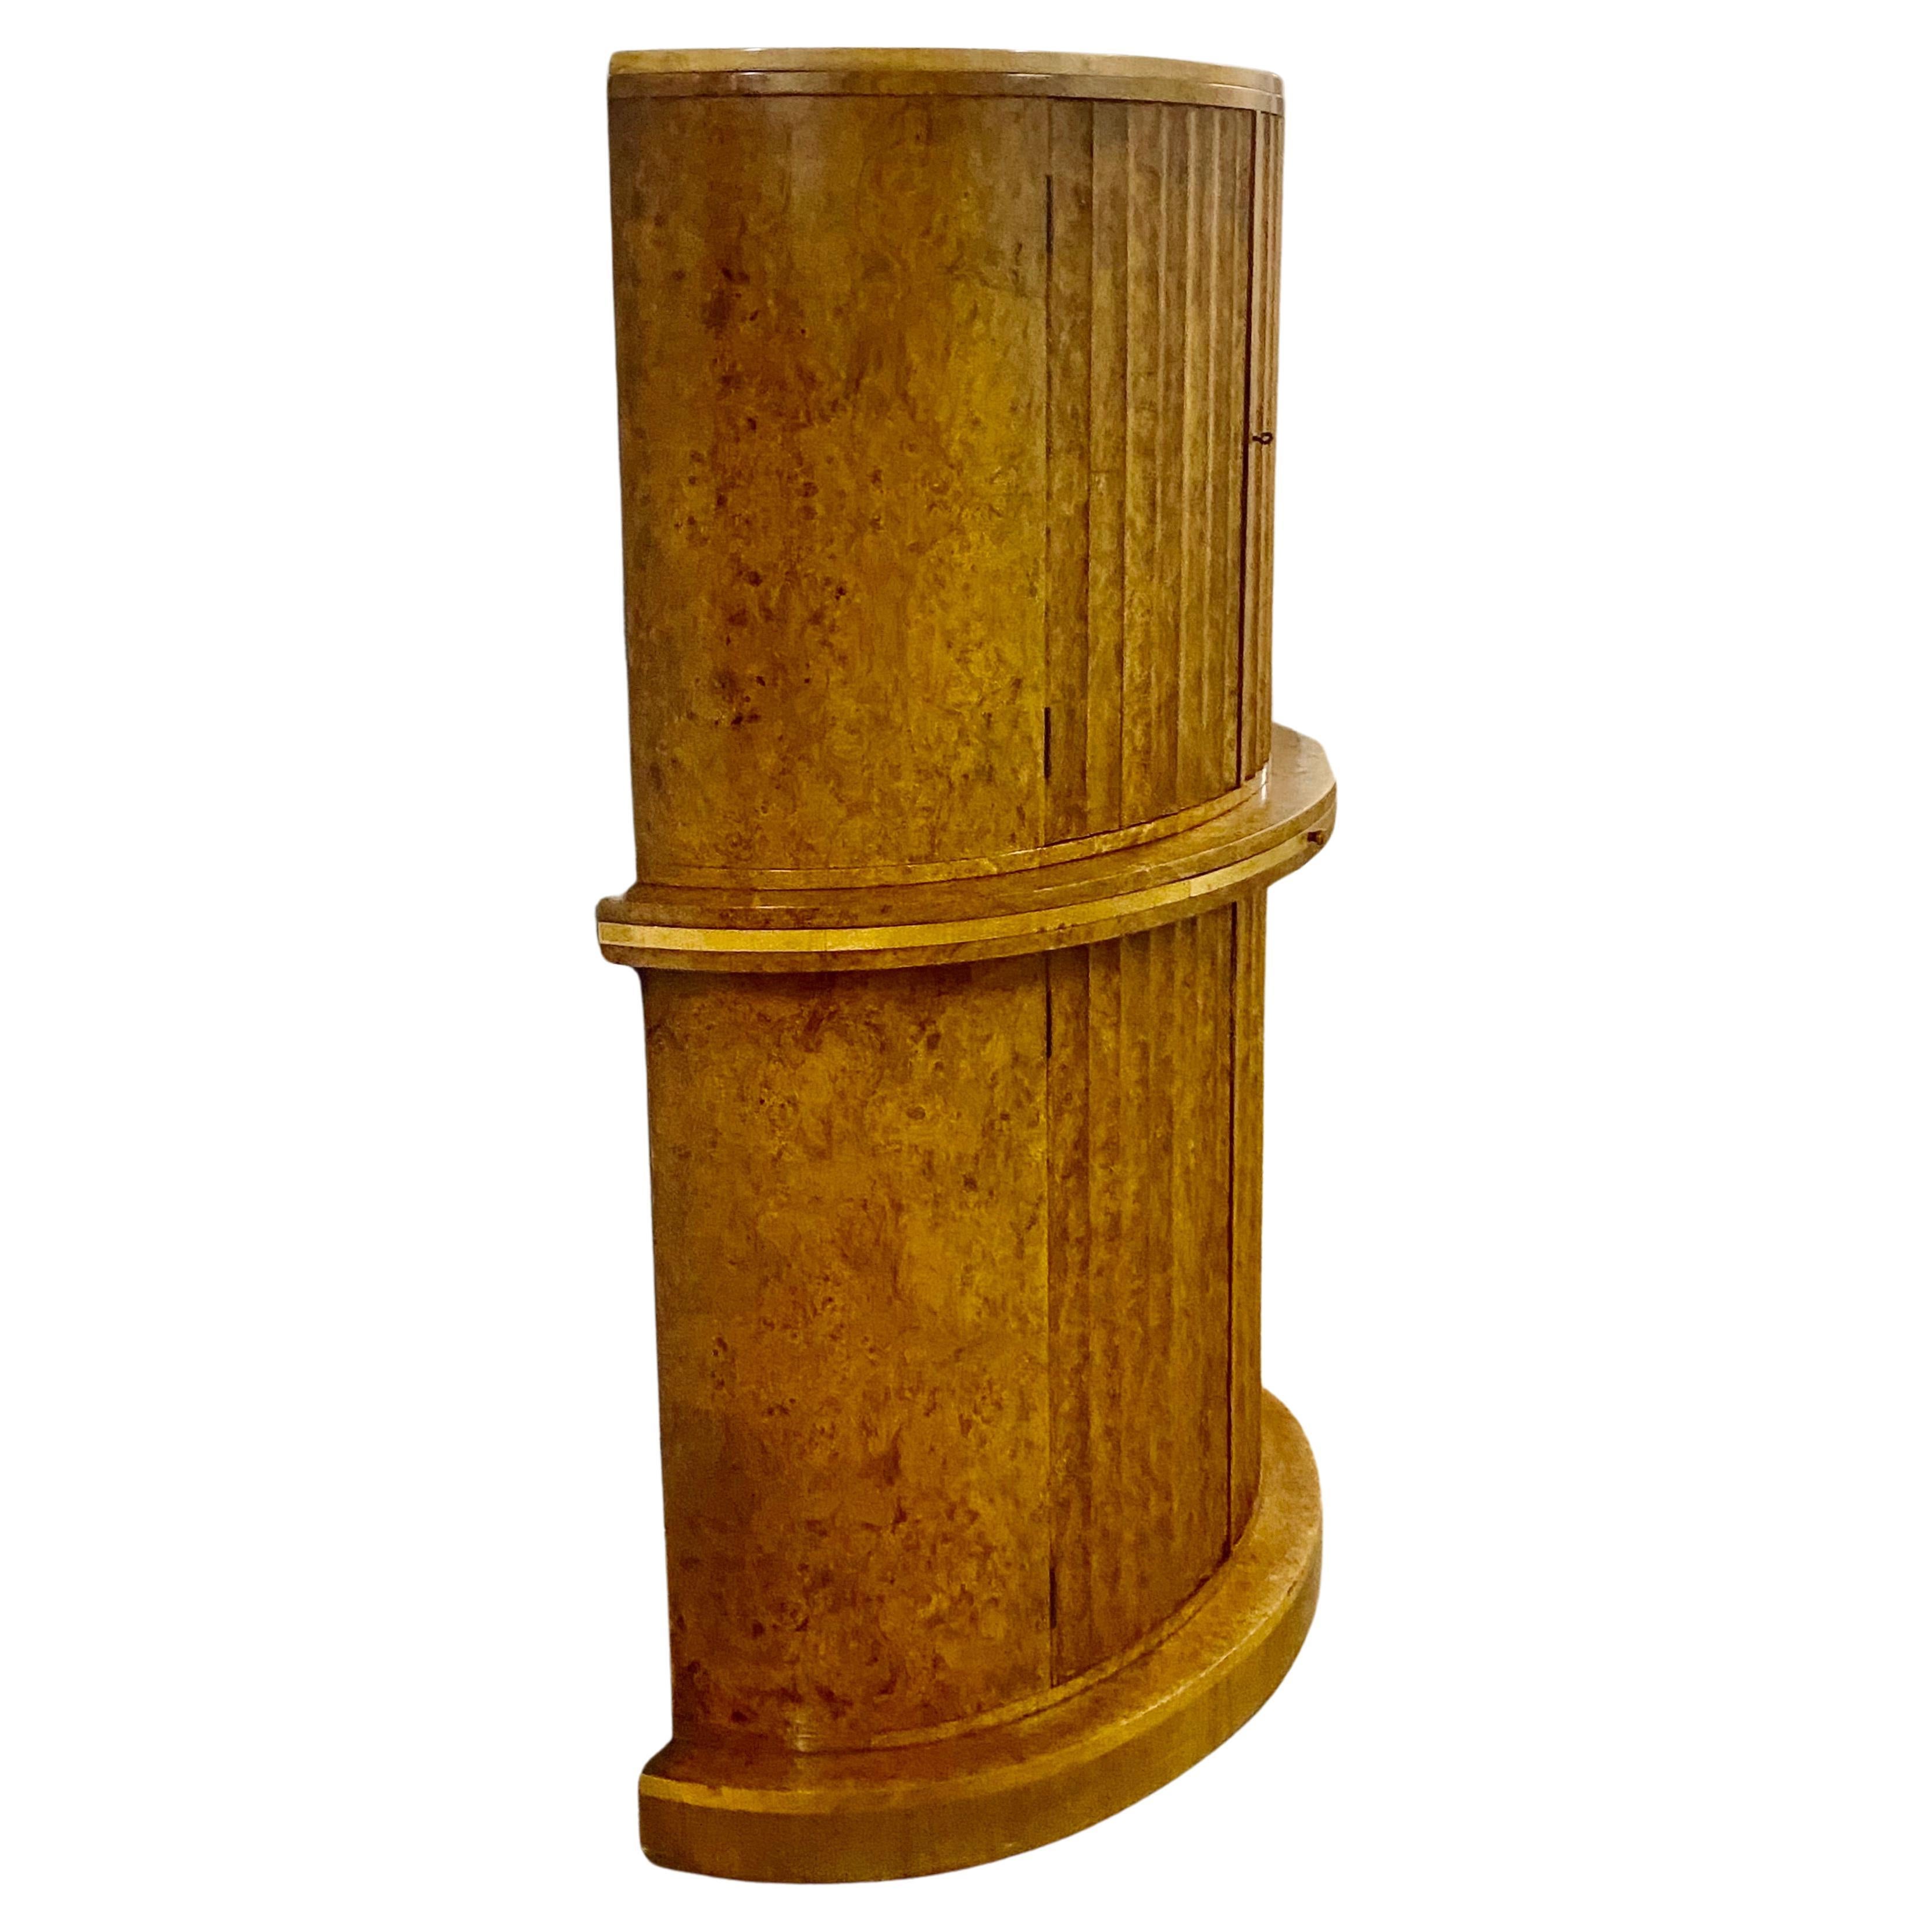  Art Deco Blonde Burl Maple Semi Circular Cocktail Cabinet Bar by H&L Epstein  For Sale 3